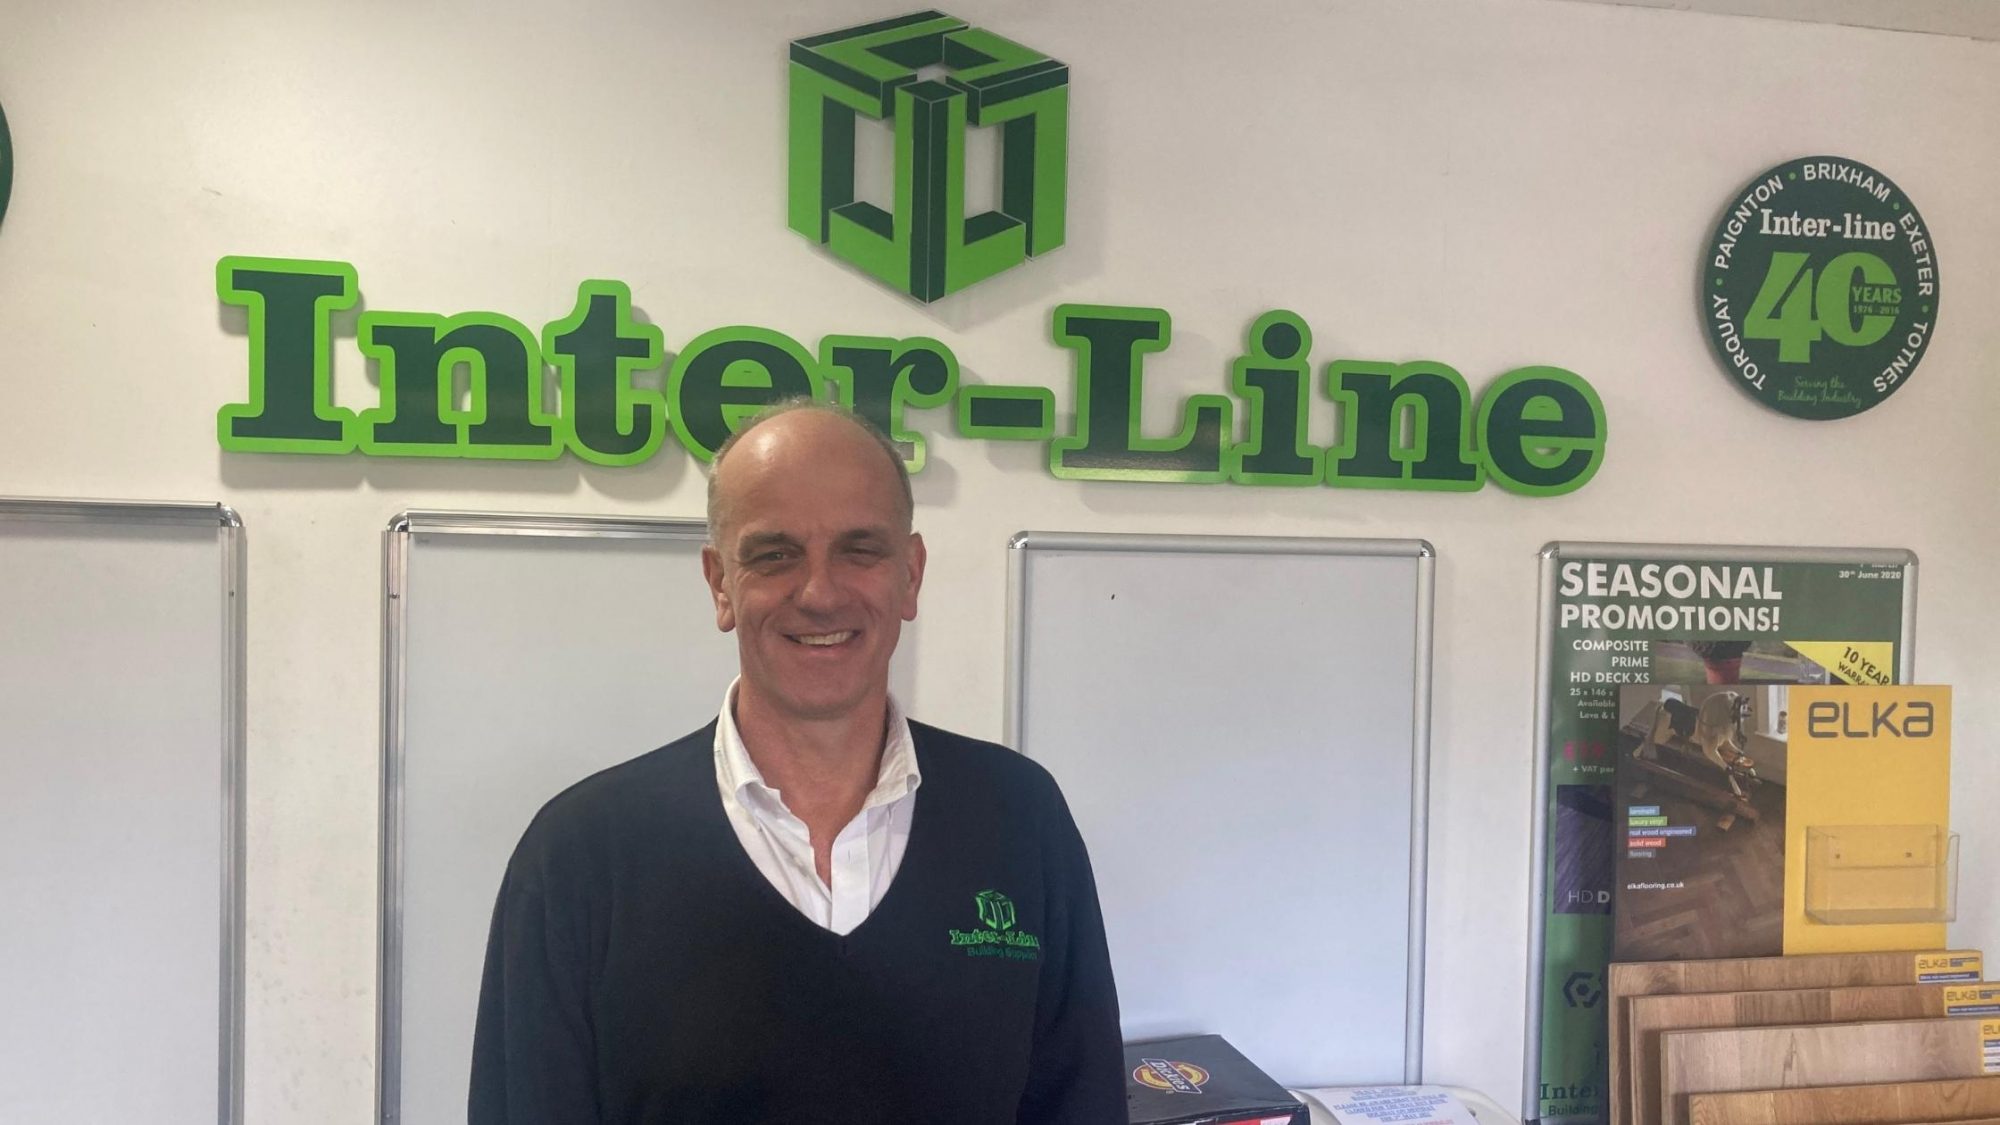 Inter-line staff member smiles in front of the Interline logo.